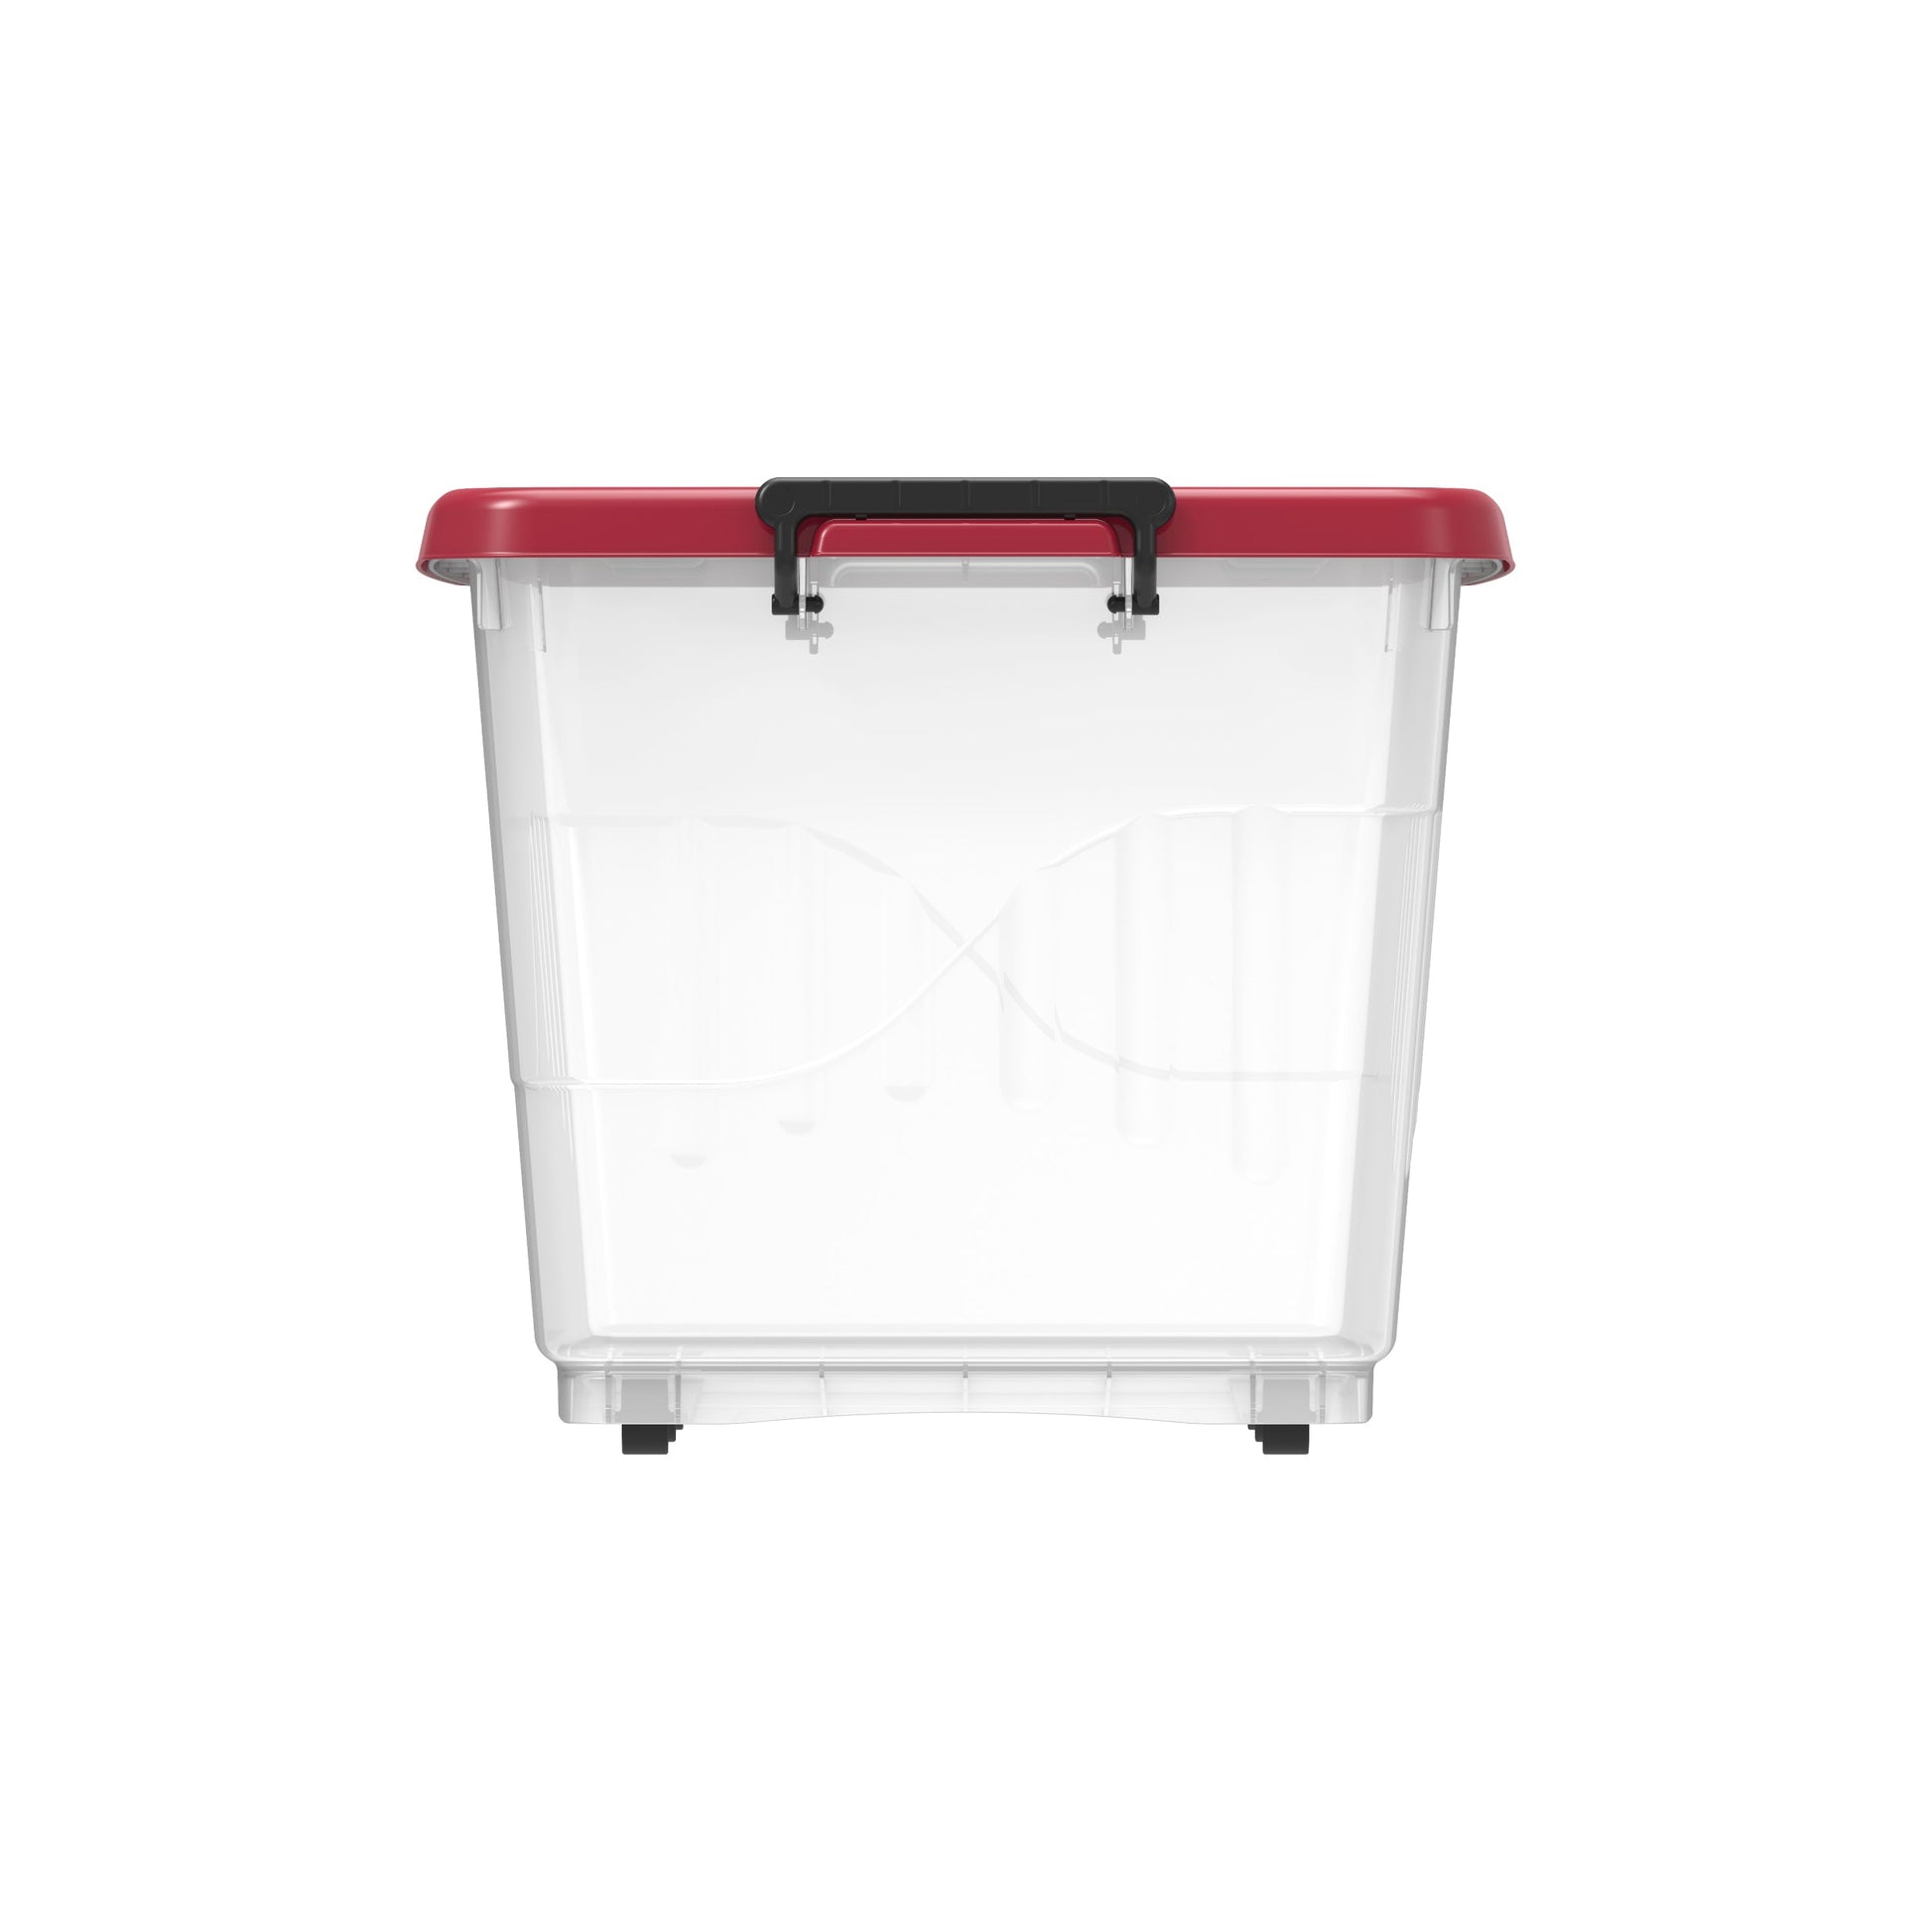 CLEAR PLASTIC STORAGE BOX WITH WHEELS 